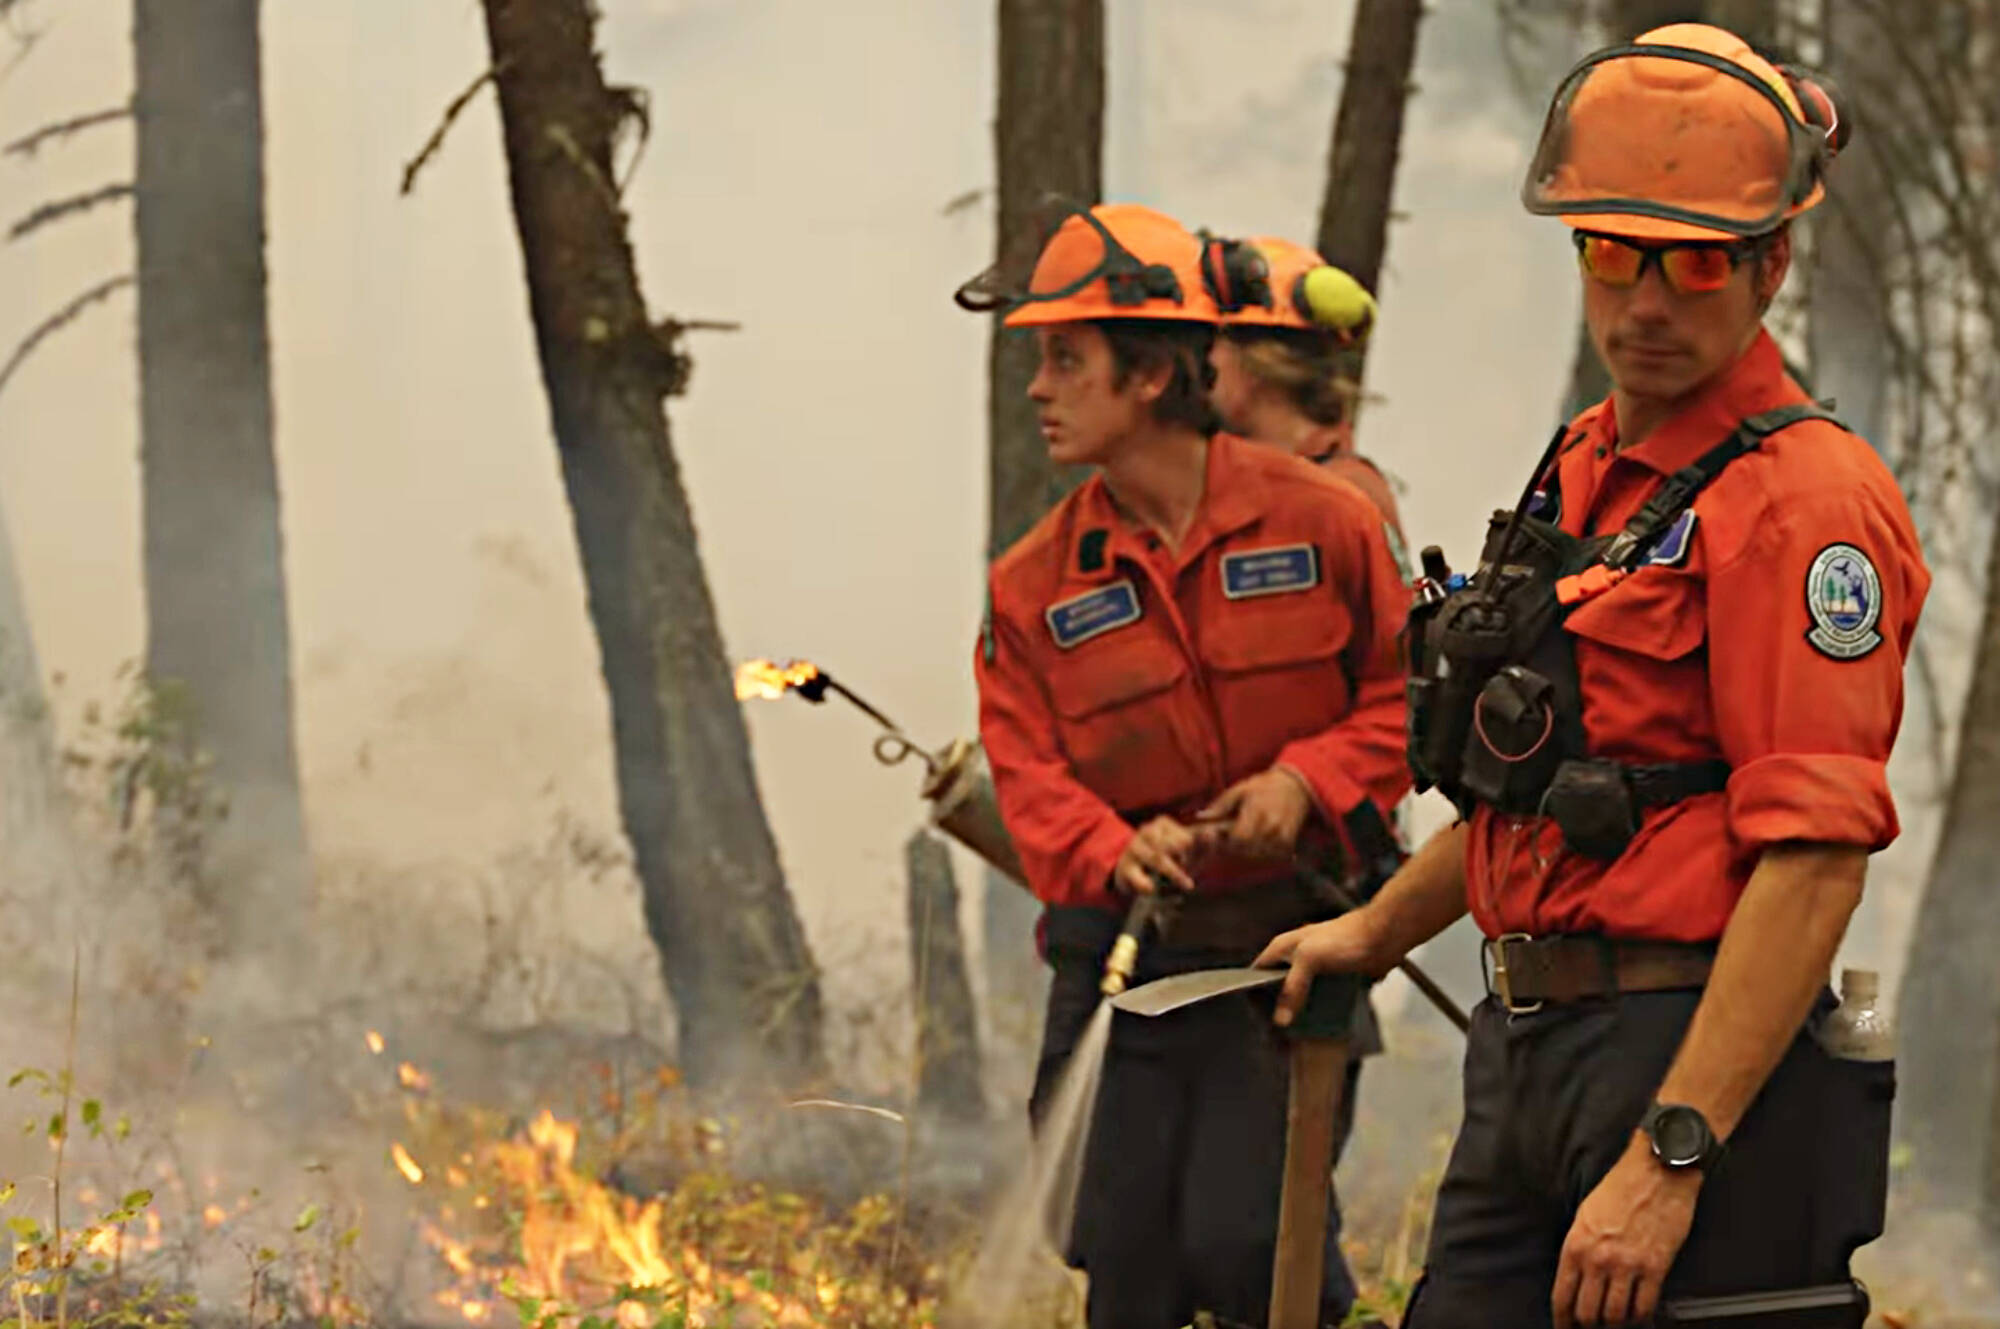 BC Wildfire Service wildland firefighters work the Bush Creek East wildfire in the Shuswap. (BCWS image)